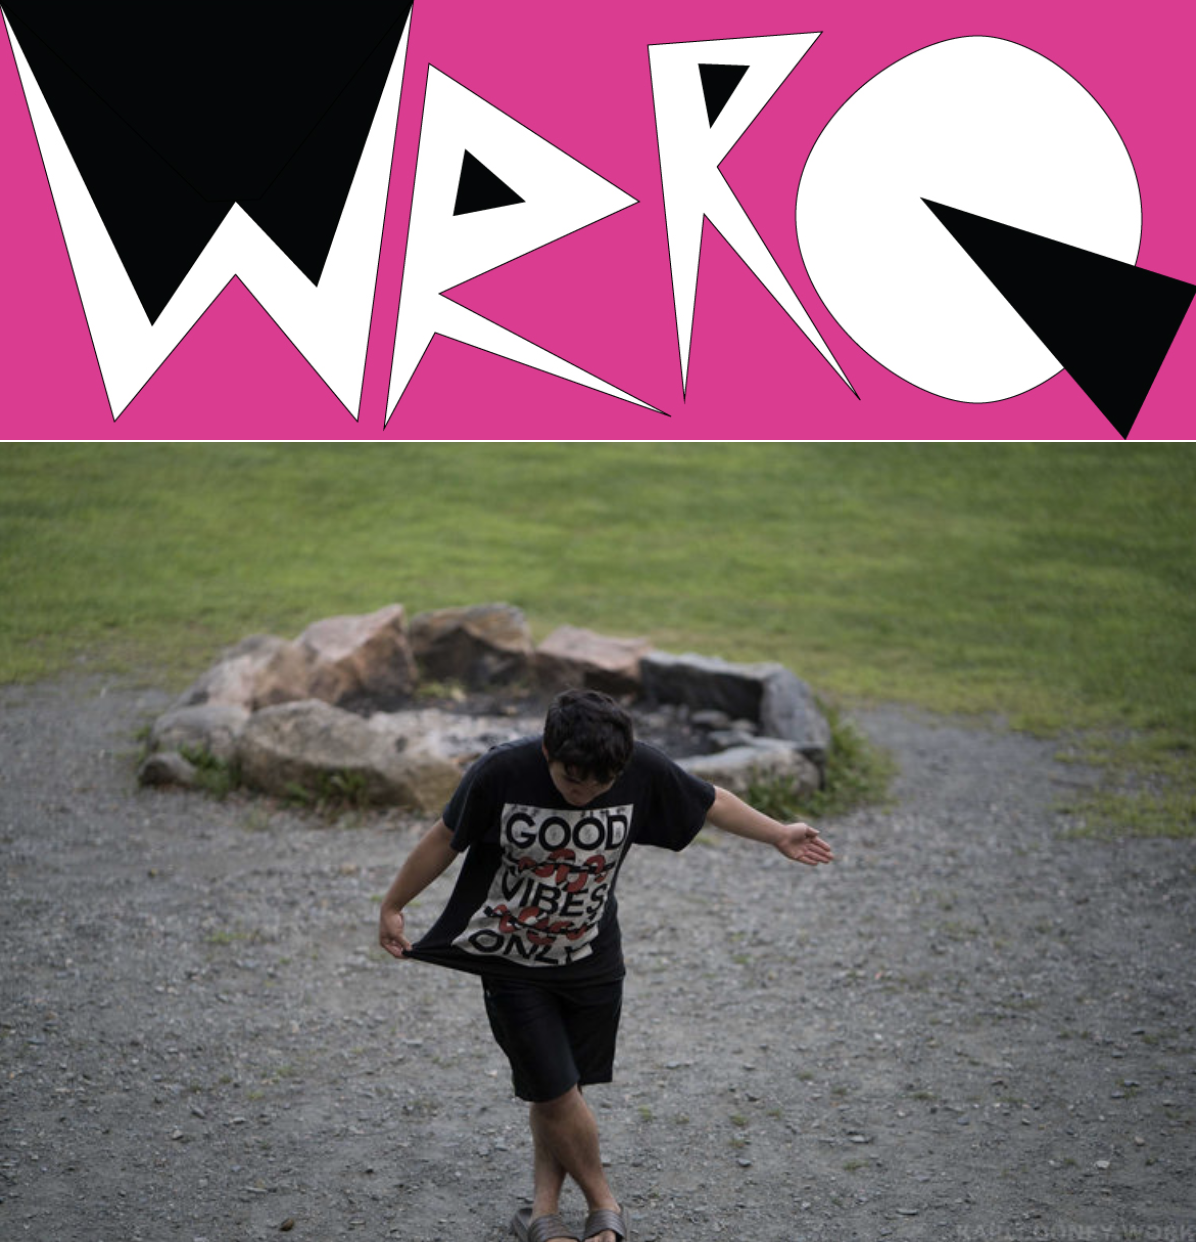 WRRQ COLLECTIVE